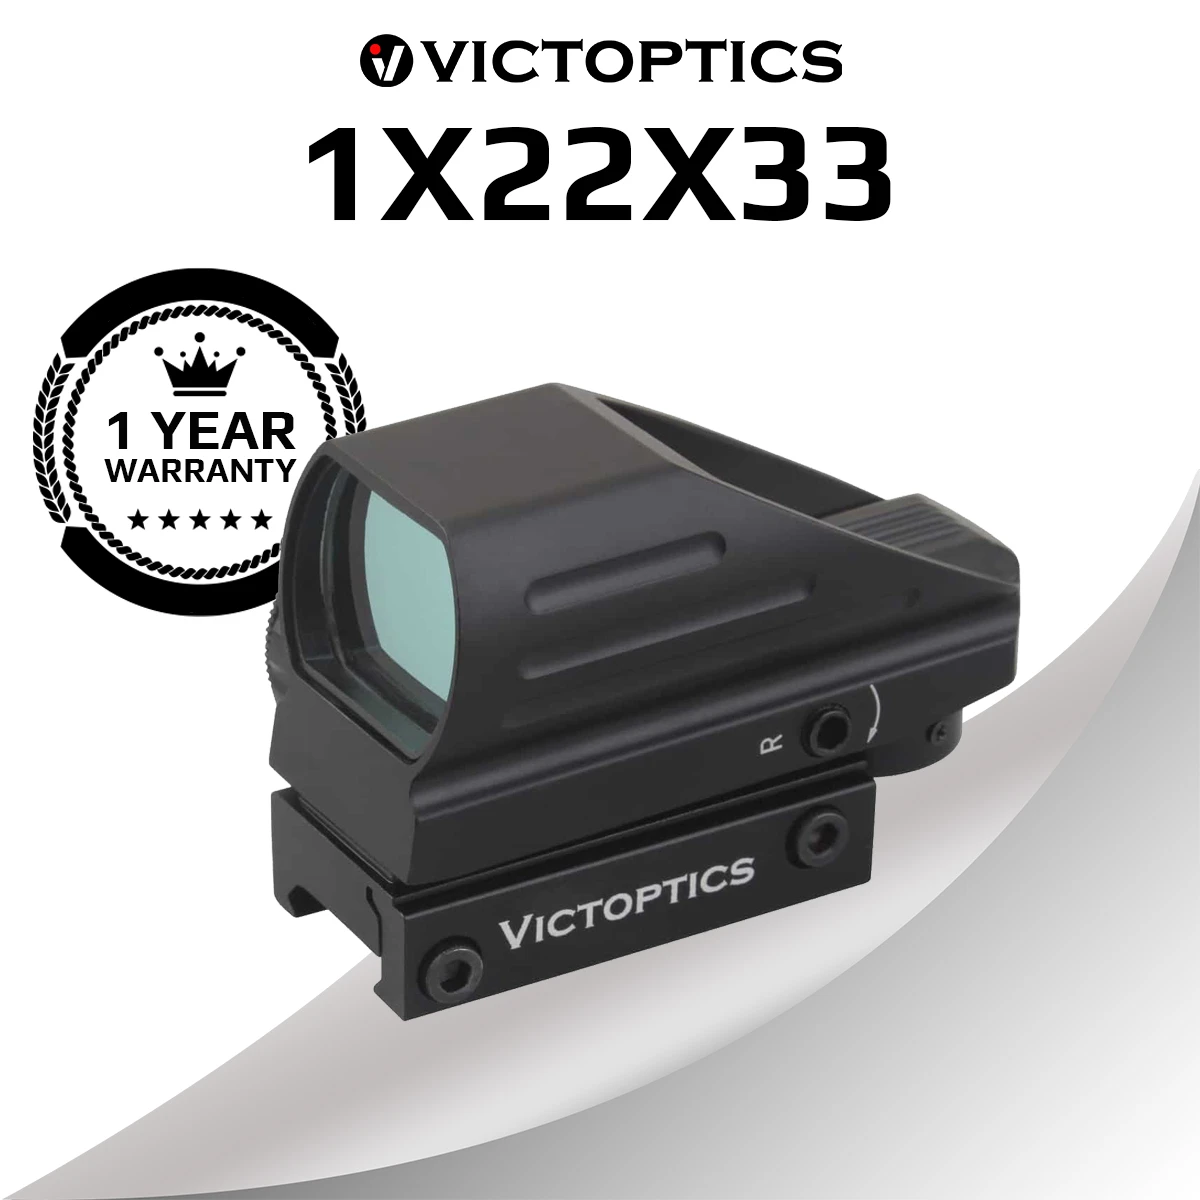 VictOptics 1x22x33 Hunting Red Dot Sight Aim Optical Scope Collimator Riflescope for Real Firearms AR15 .223 & Airsoft Shooting